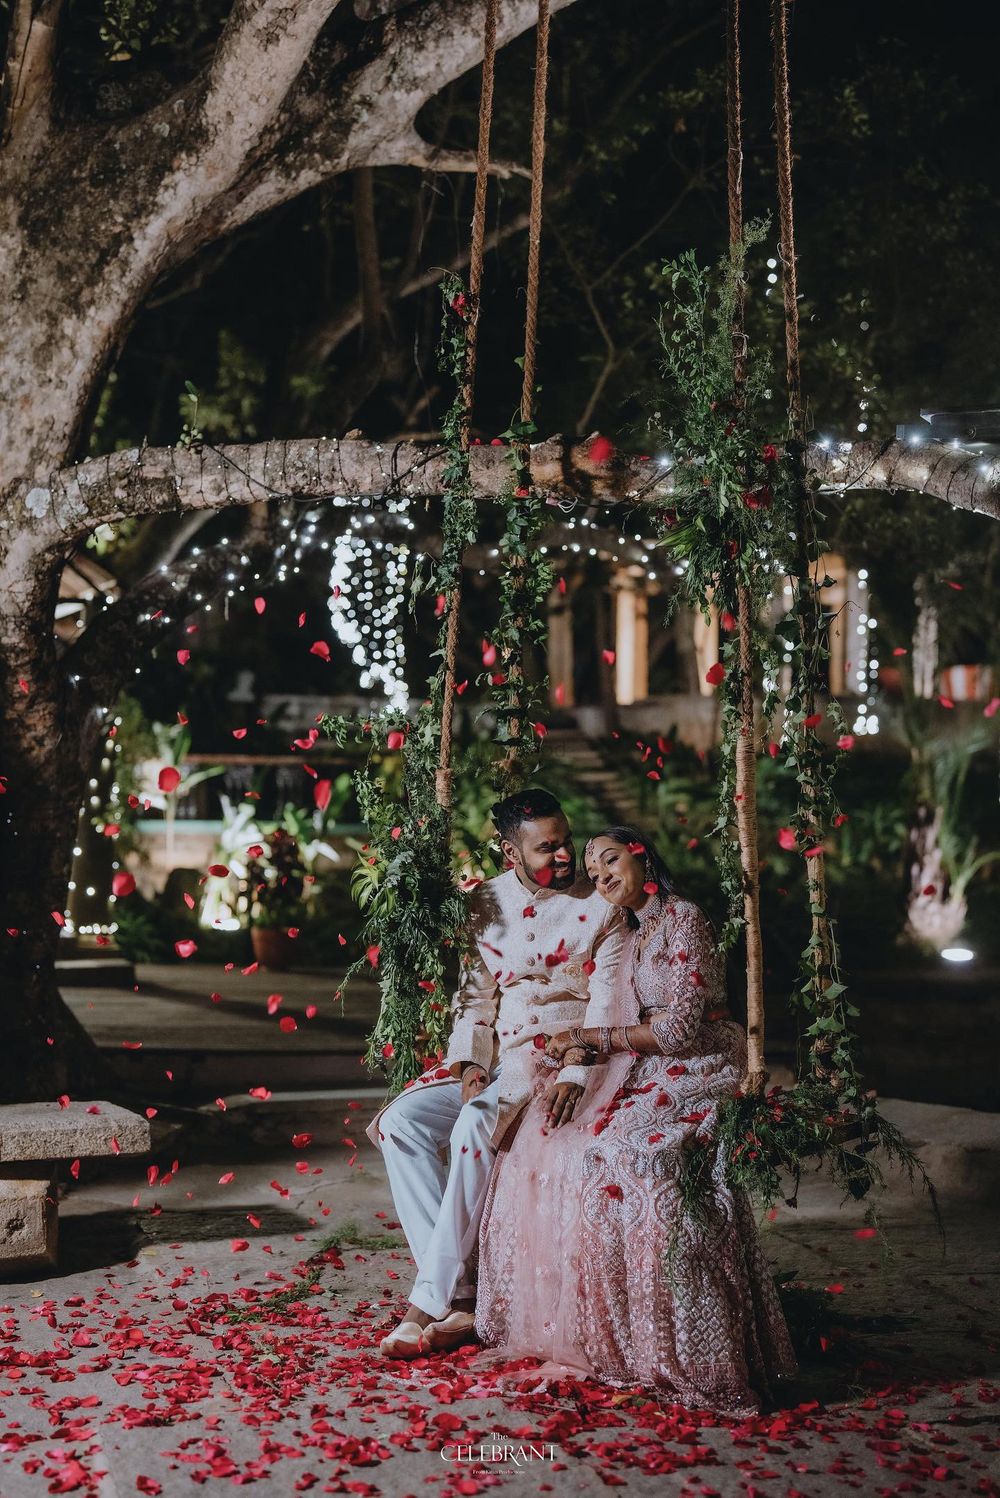 Photo By Best Day Ever by Deepika Shetty - Decorators